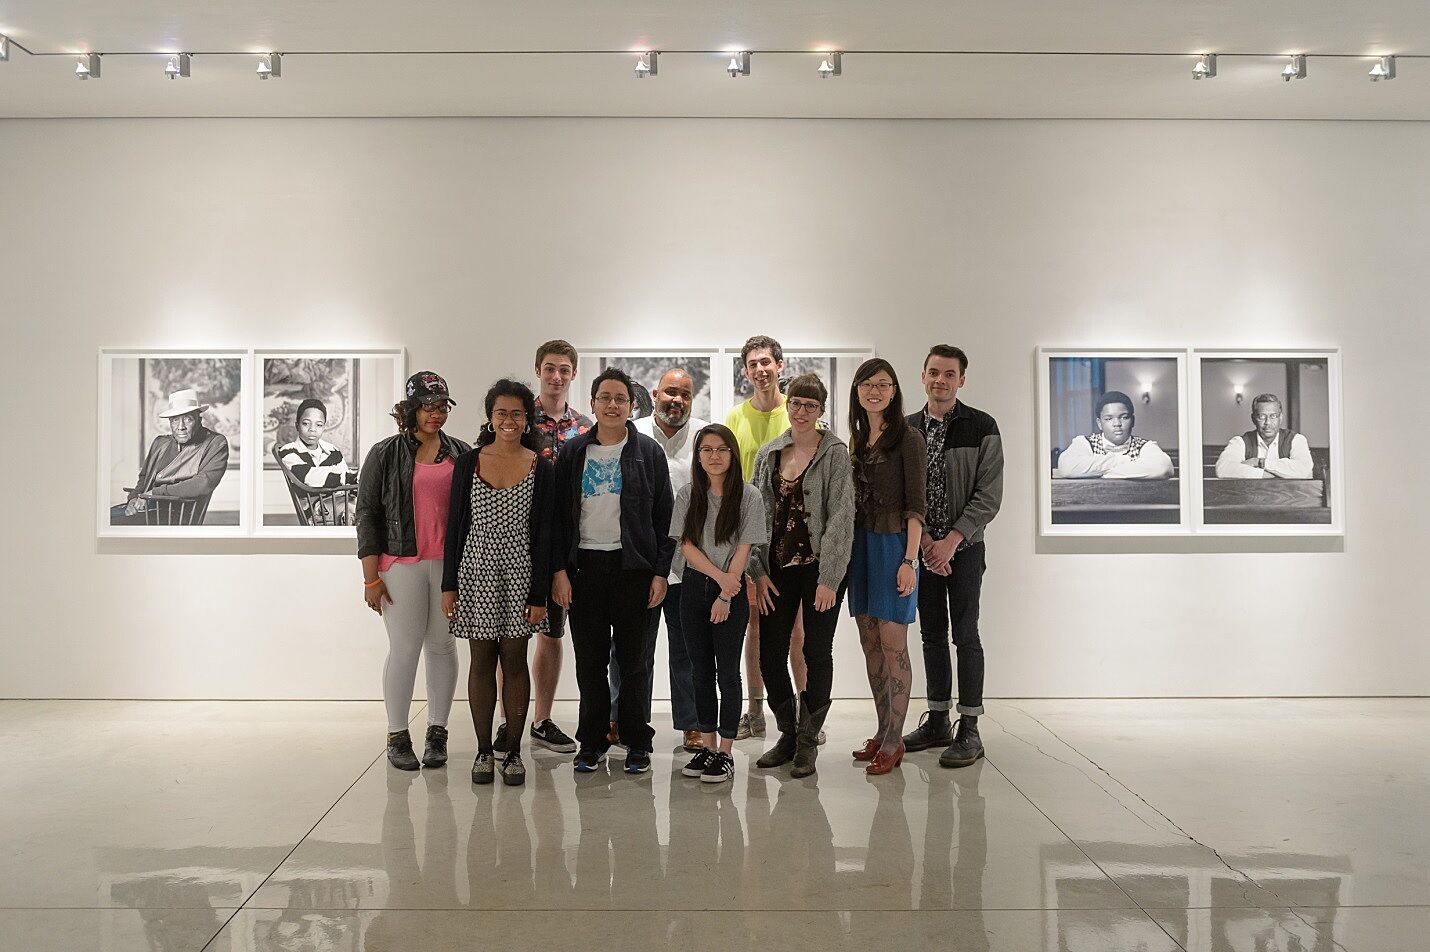 The artist Dawoud Bey poses with a group of youth leaders at his photo exhibit.